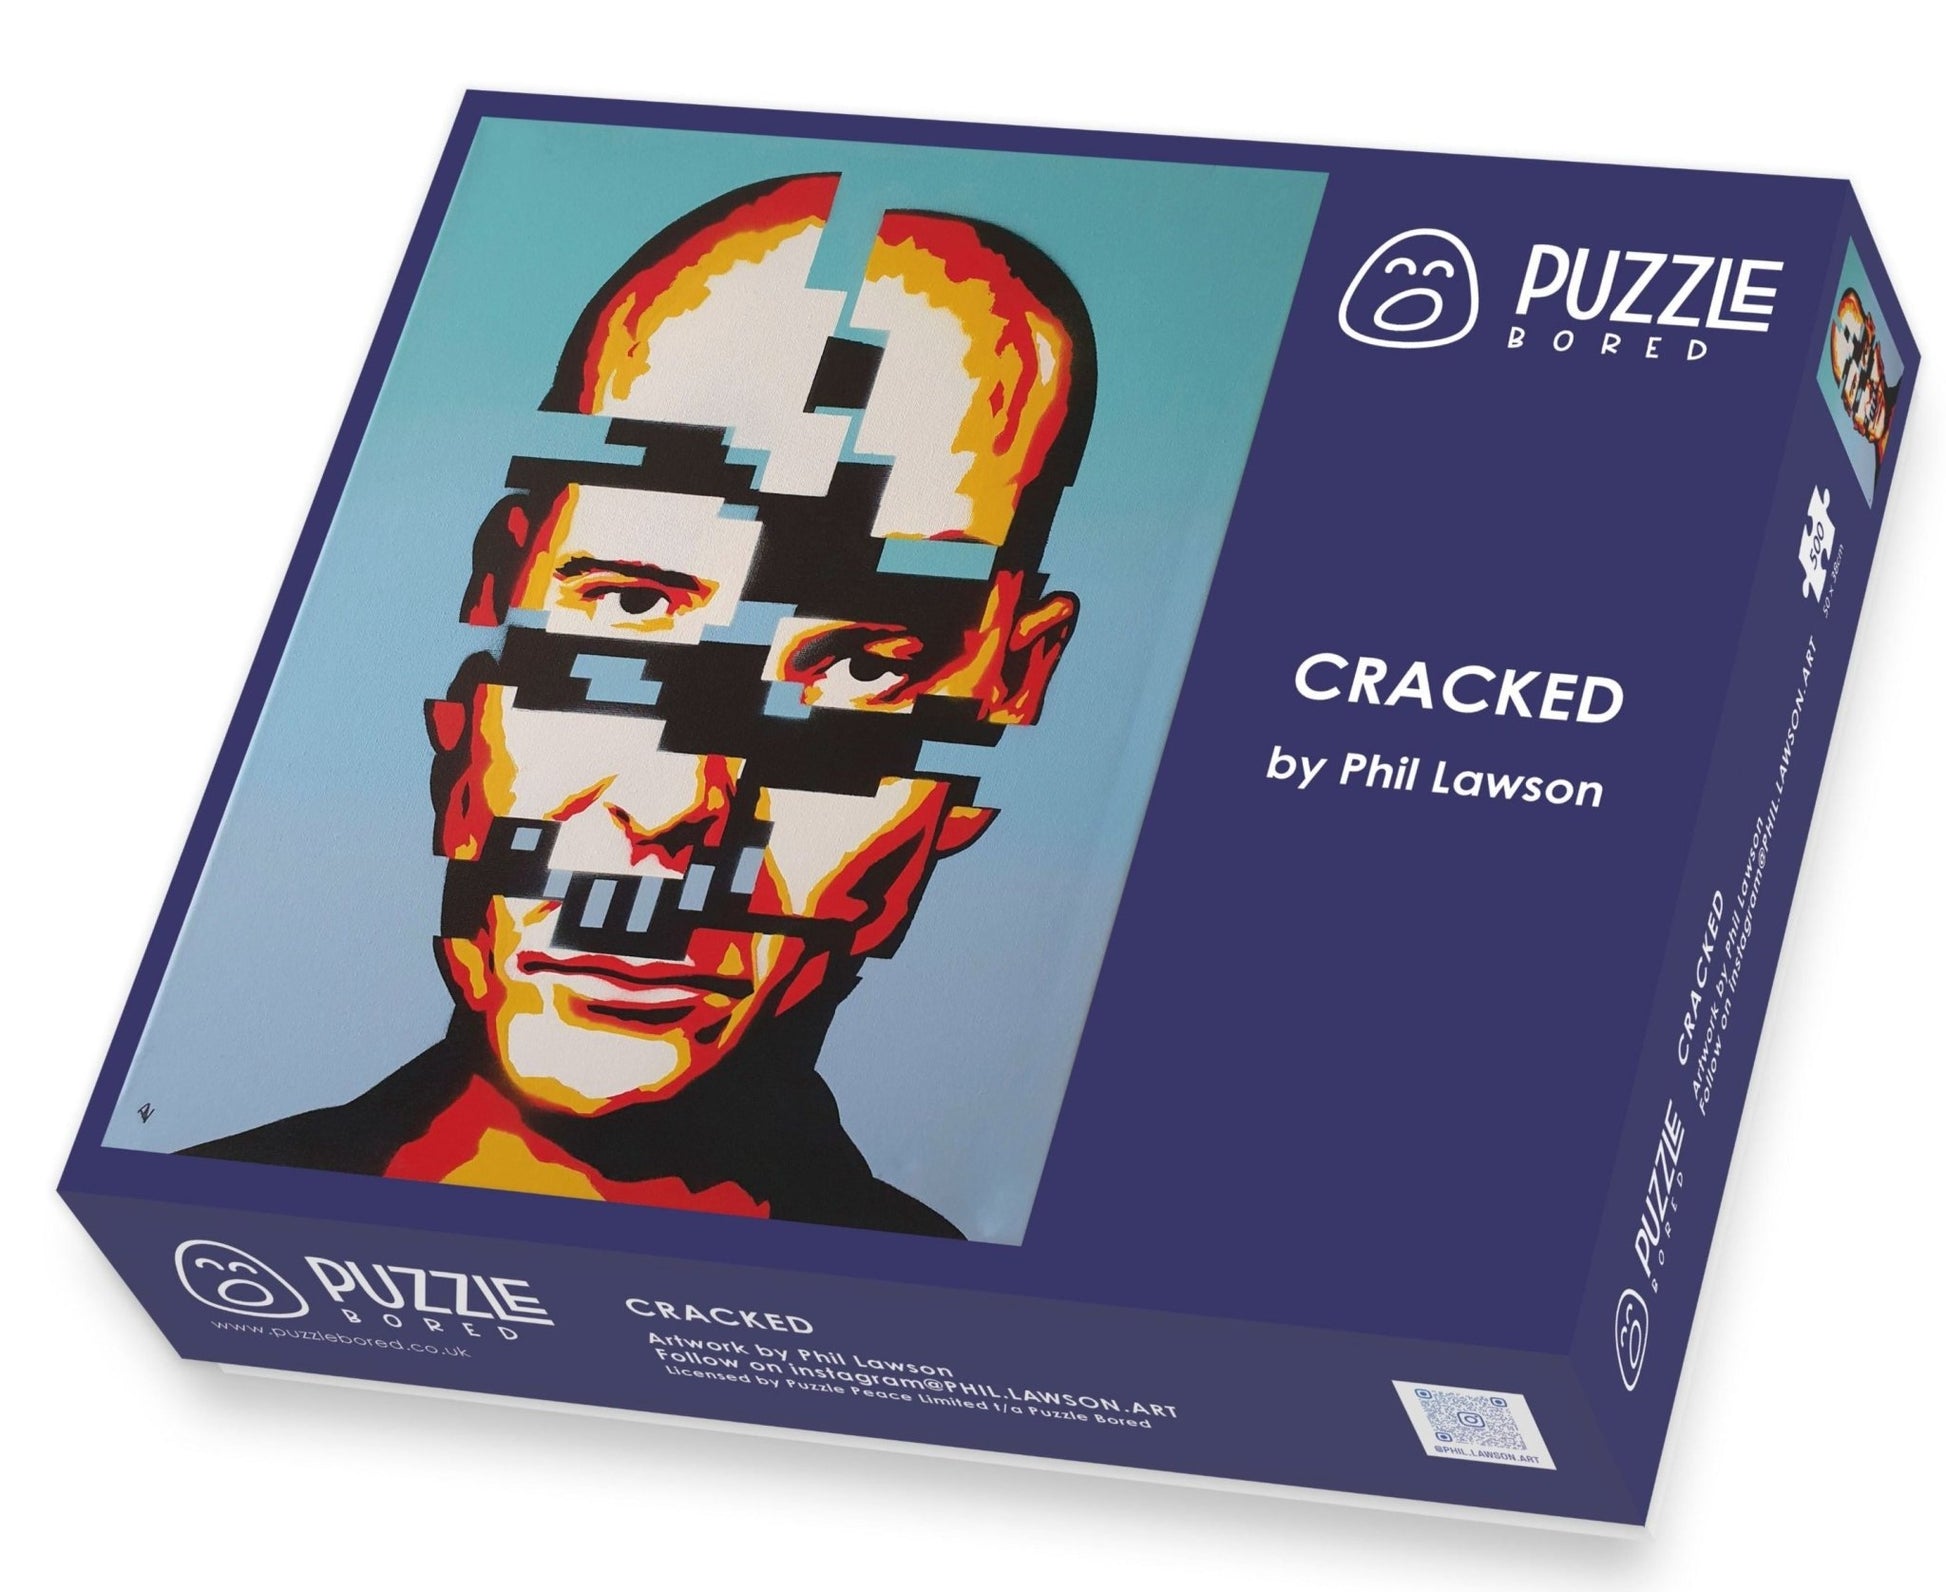 Cracked by Phil Lawson - Puzzle Bored